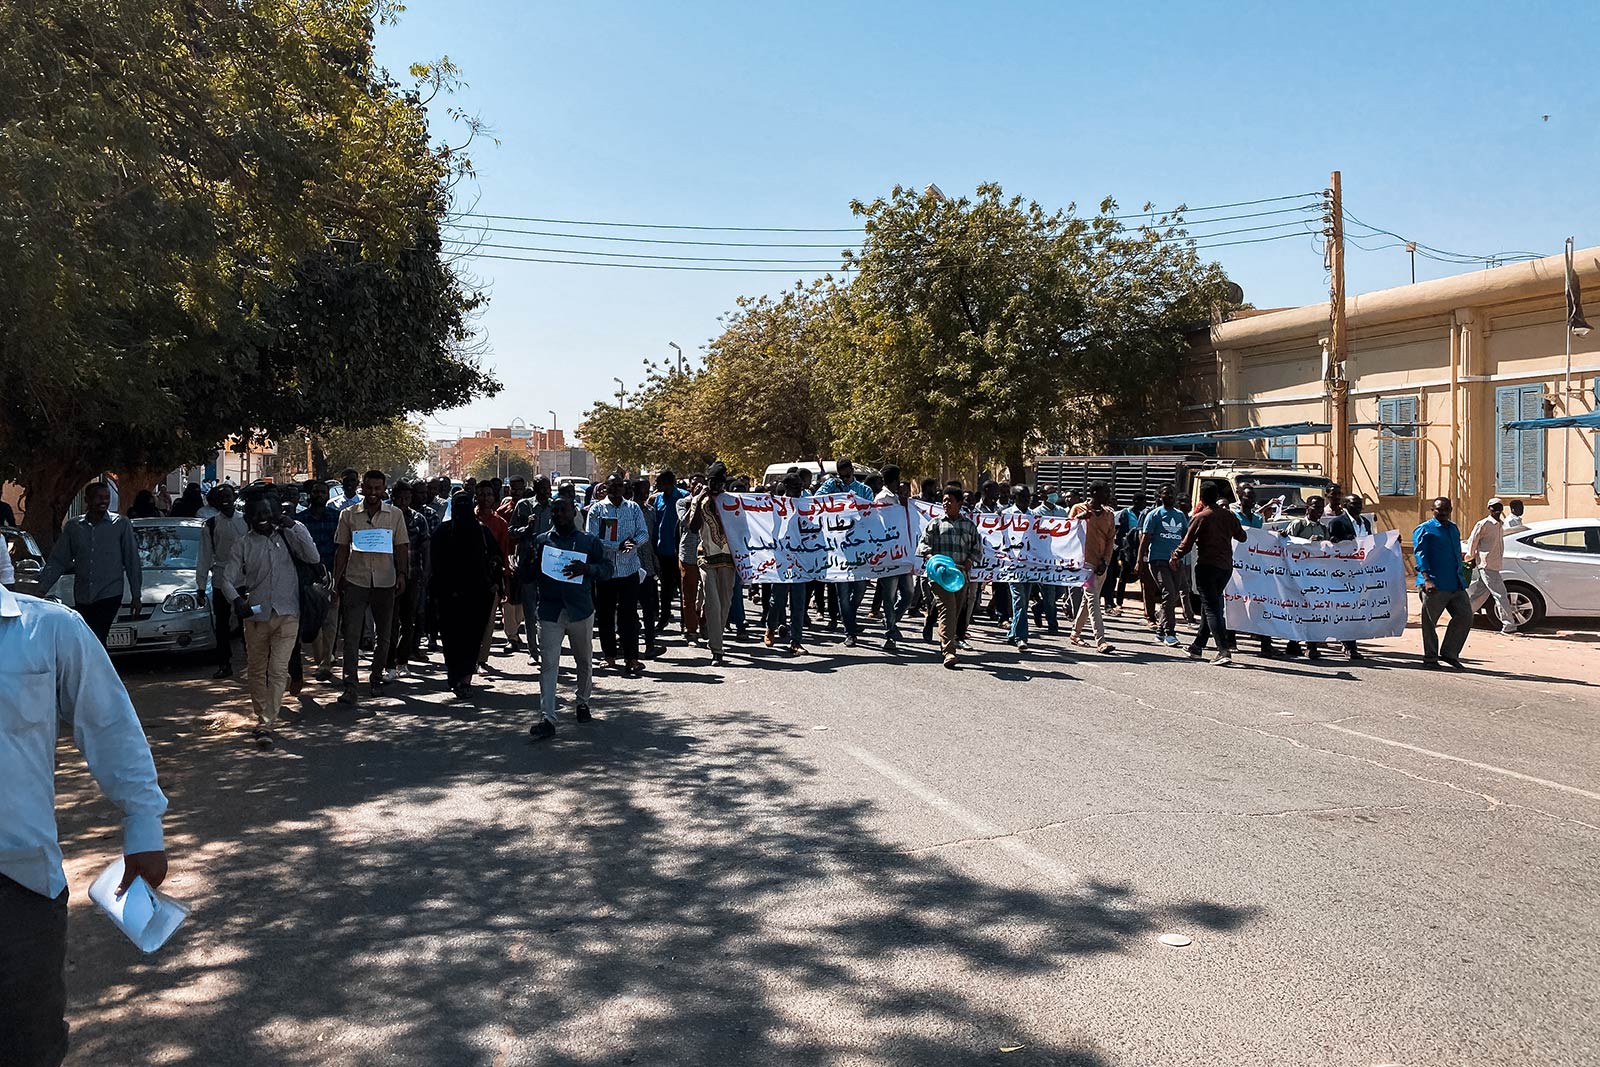 Protesters walking the street in Sudan. Getting caught up in a protest in Sudan